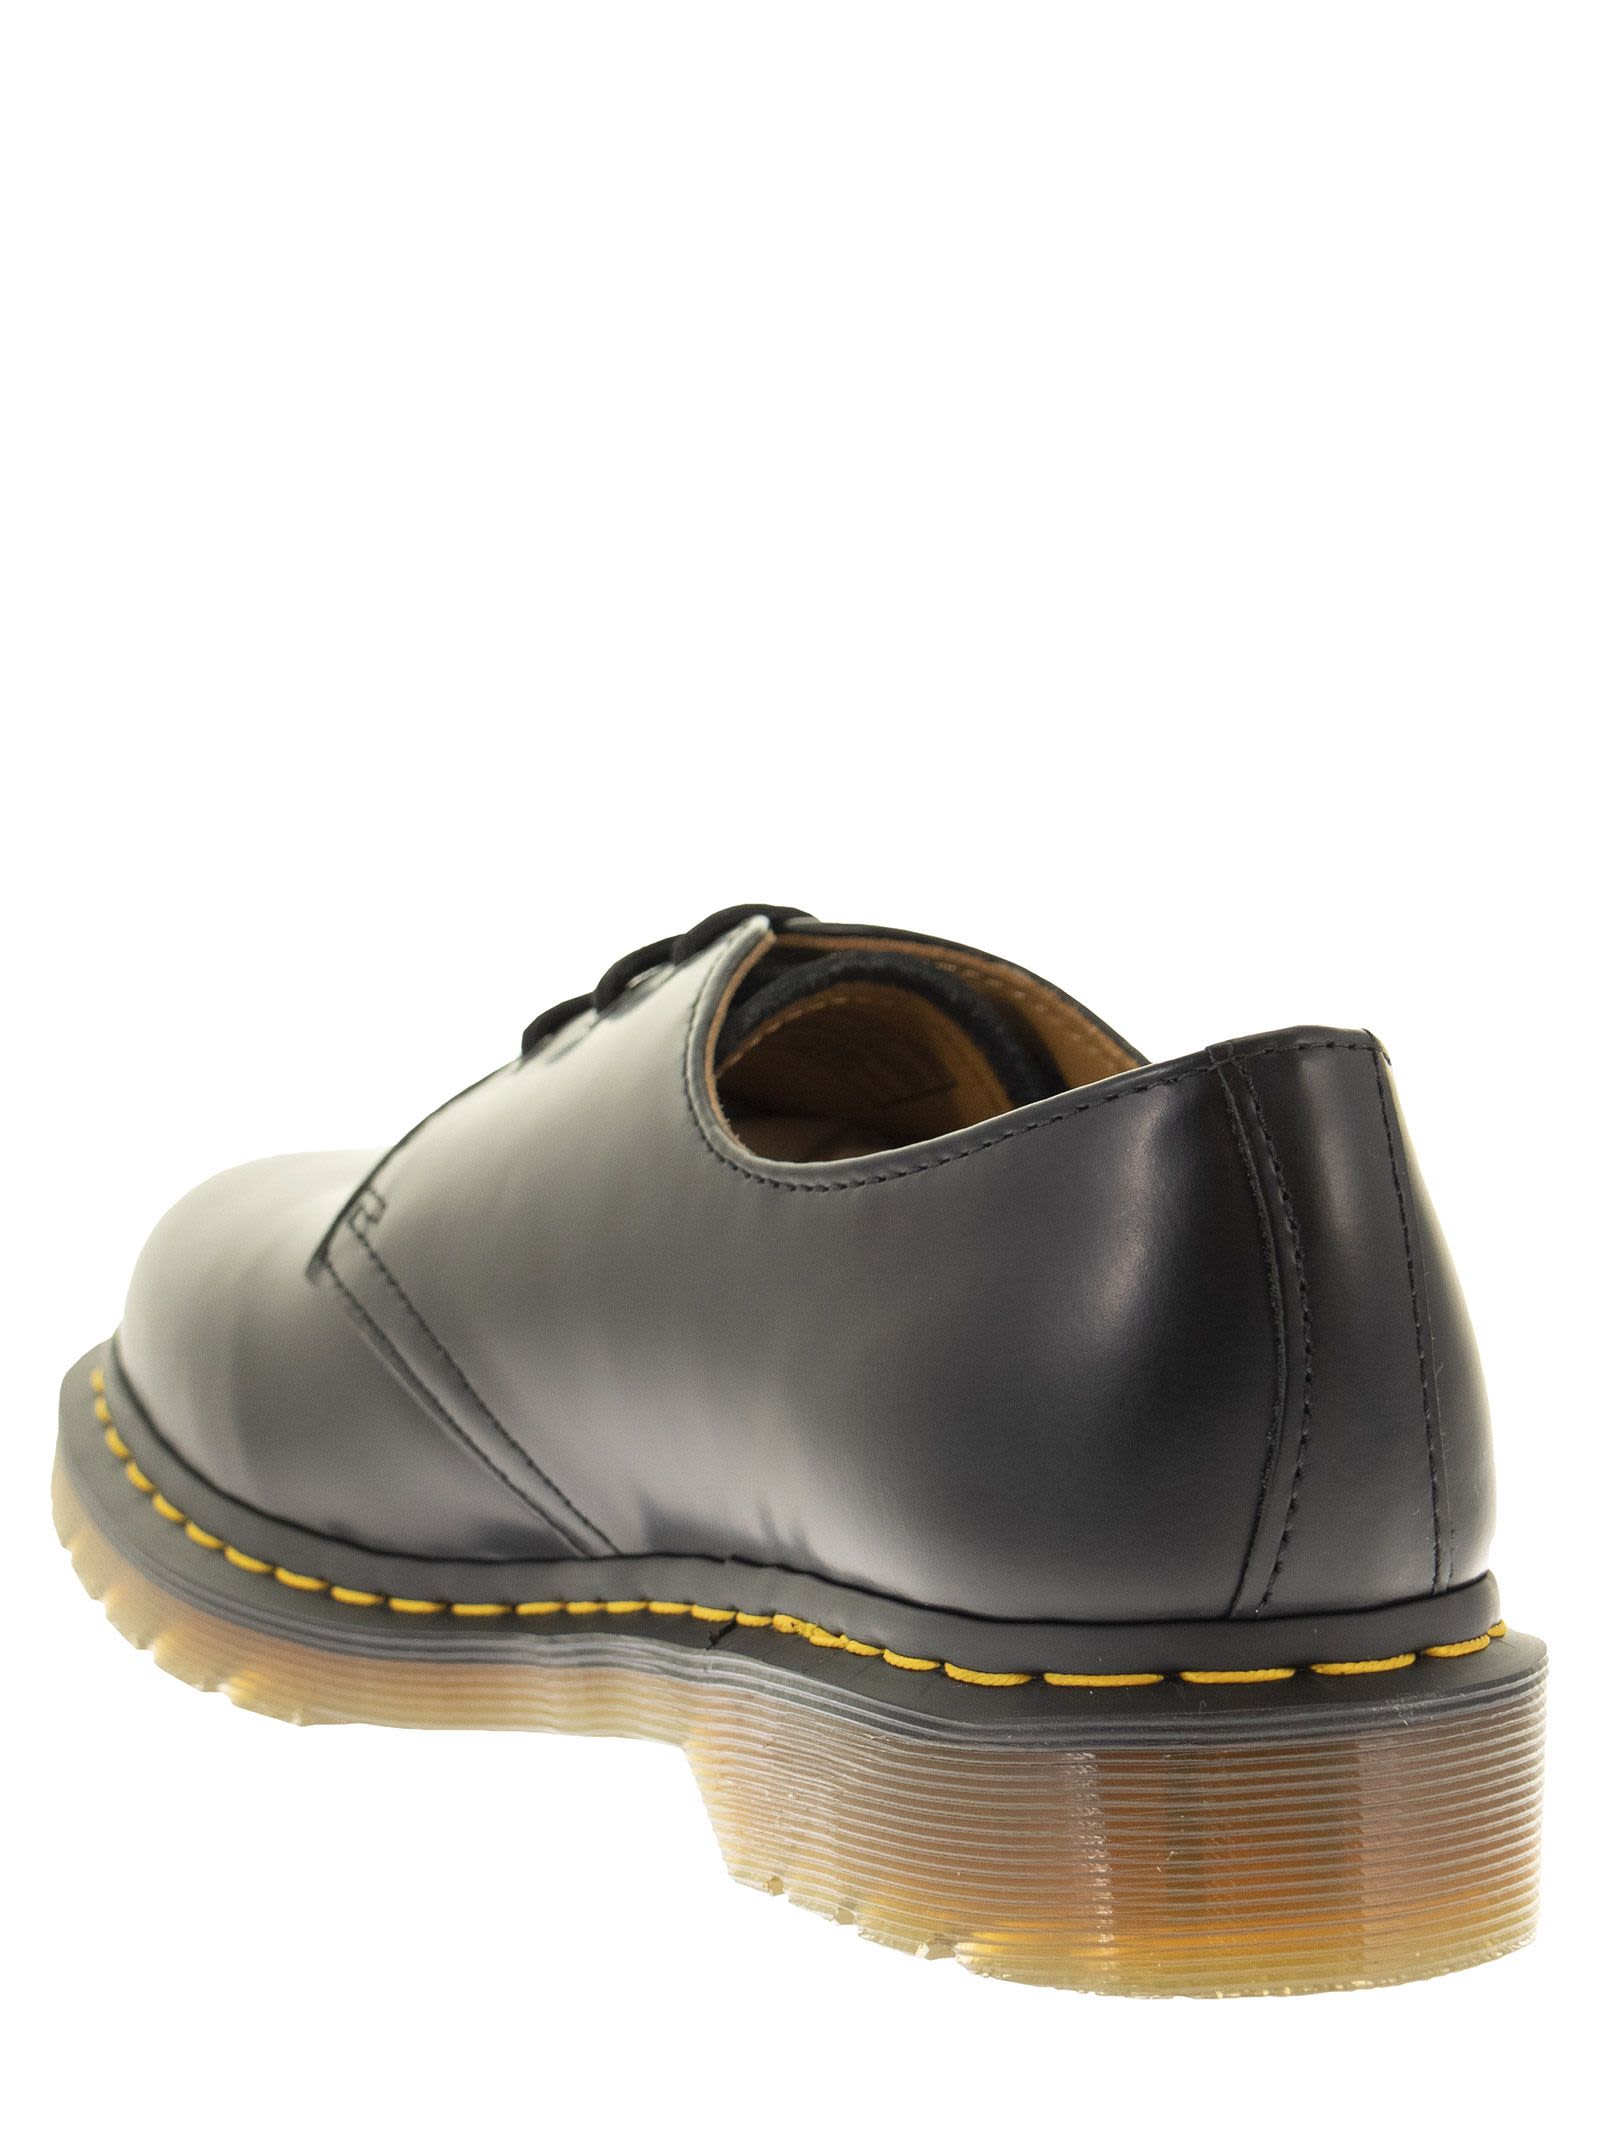 Shop Dr. Martens' 1461 Smooth - Laced